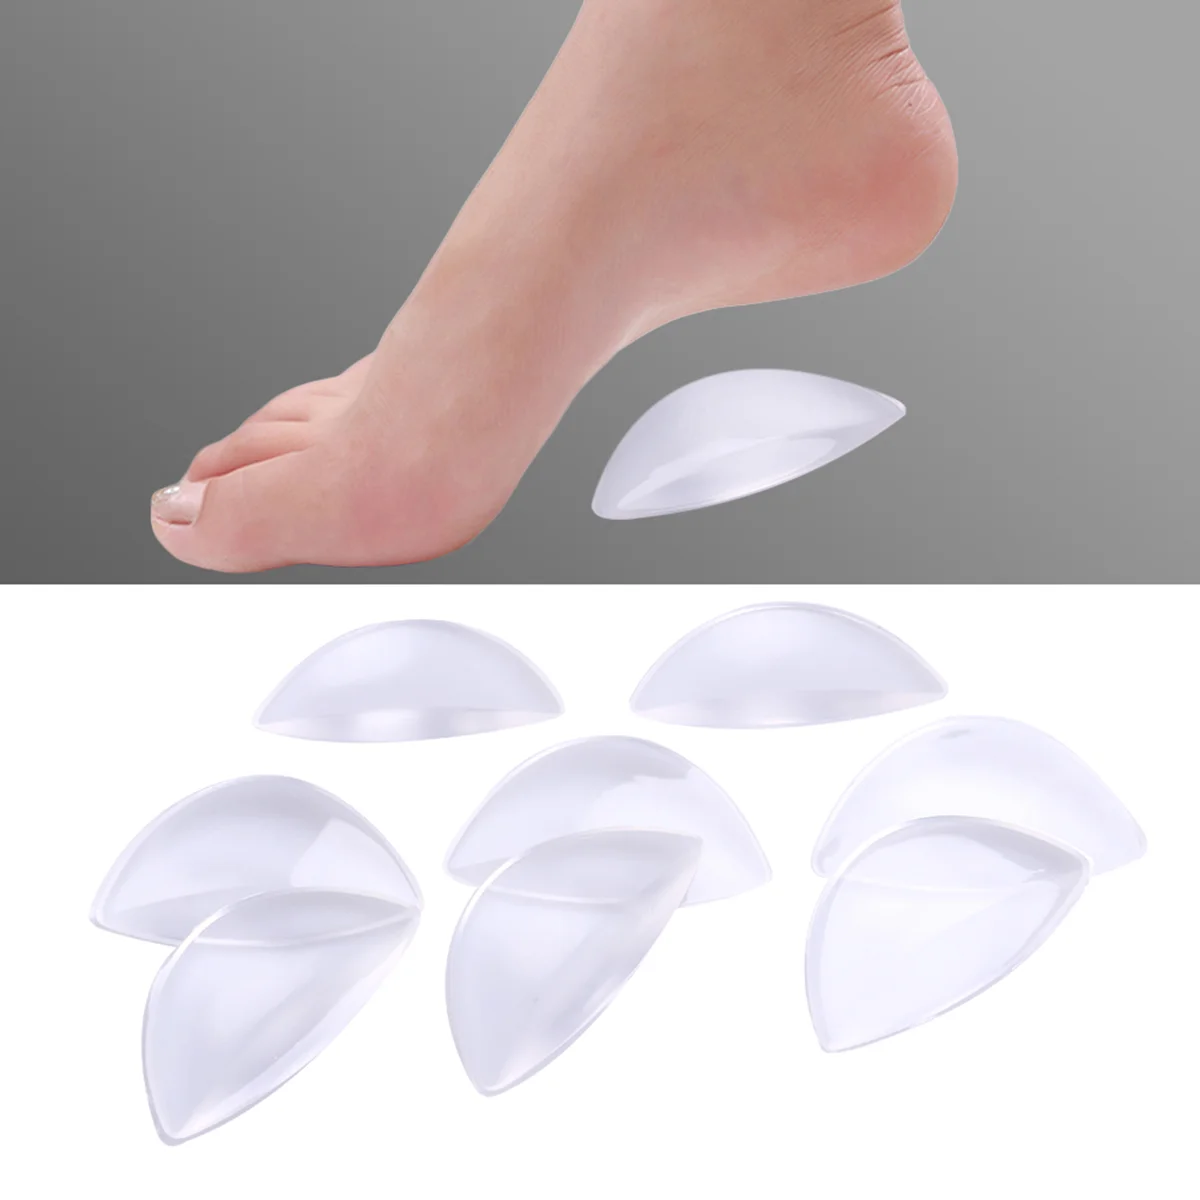 

4 Pairs Flat Pad Adhesive Arch Pad Arch Support Adhesive Arch Support Arch Support Cushions for Relieving Flats Pressure& Feet